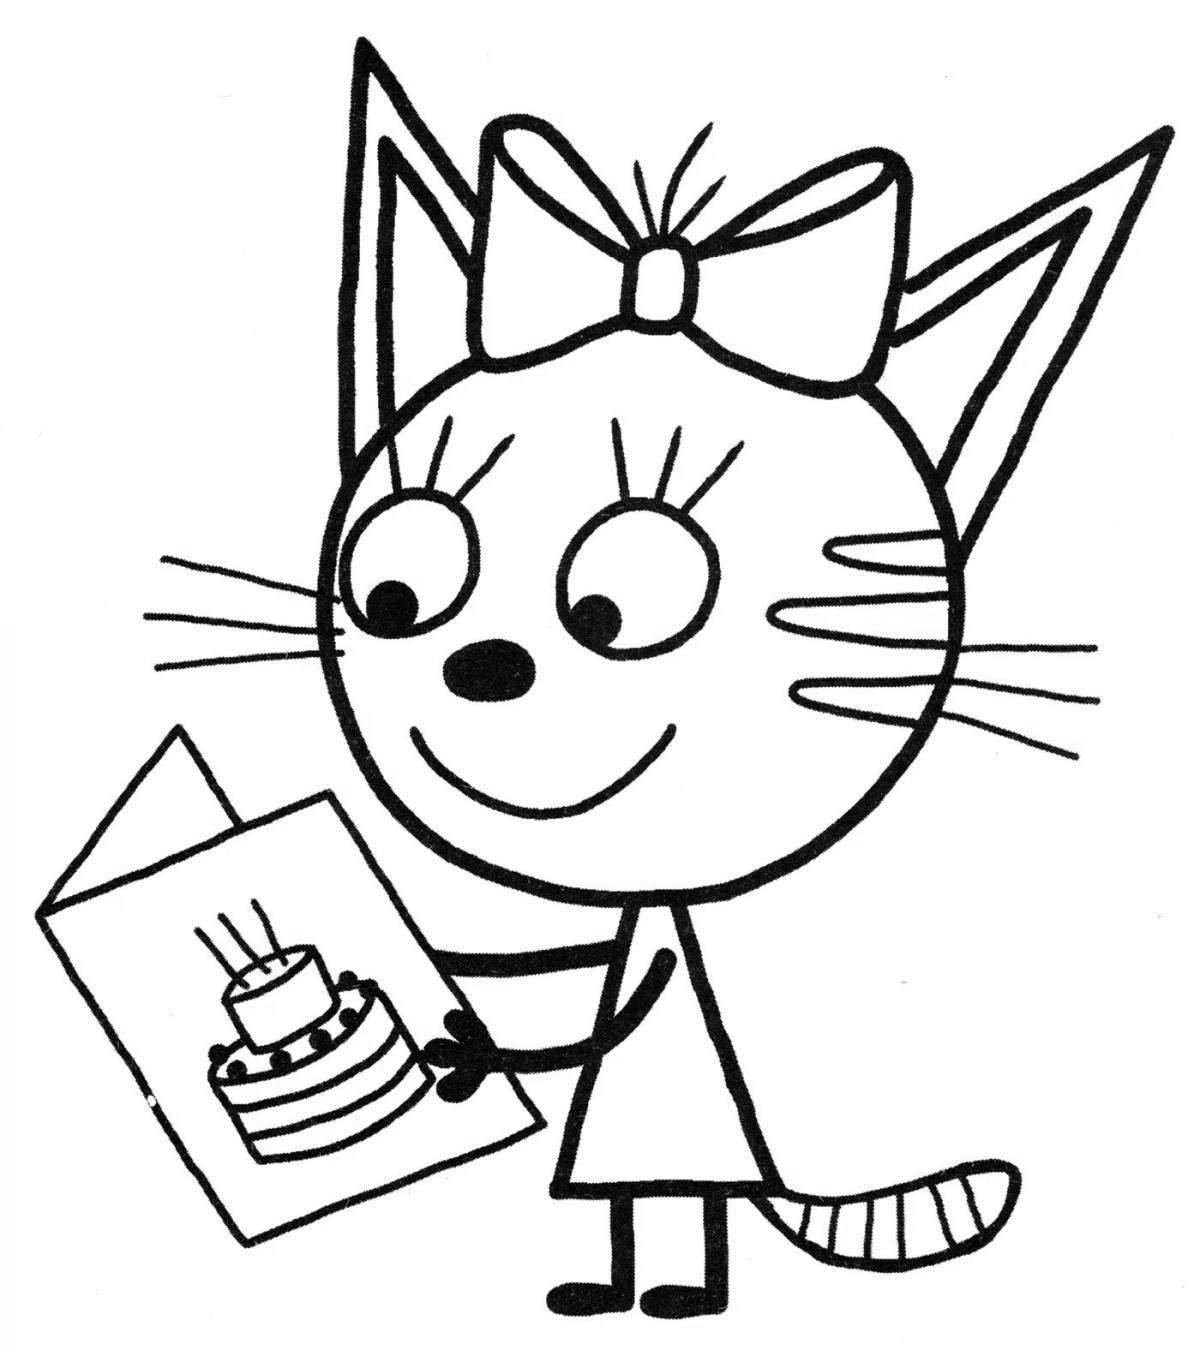 Splendid 3 cats coloring page for girls